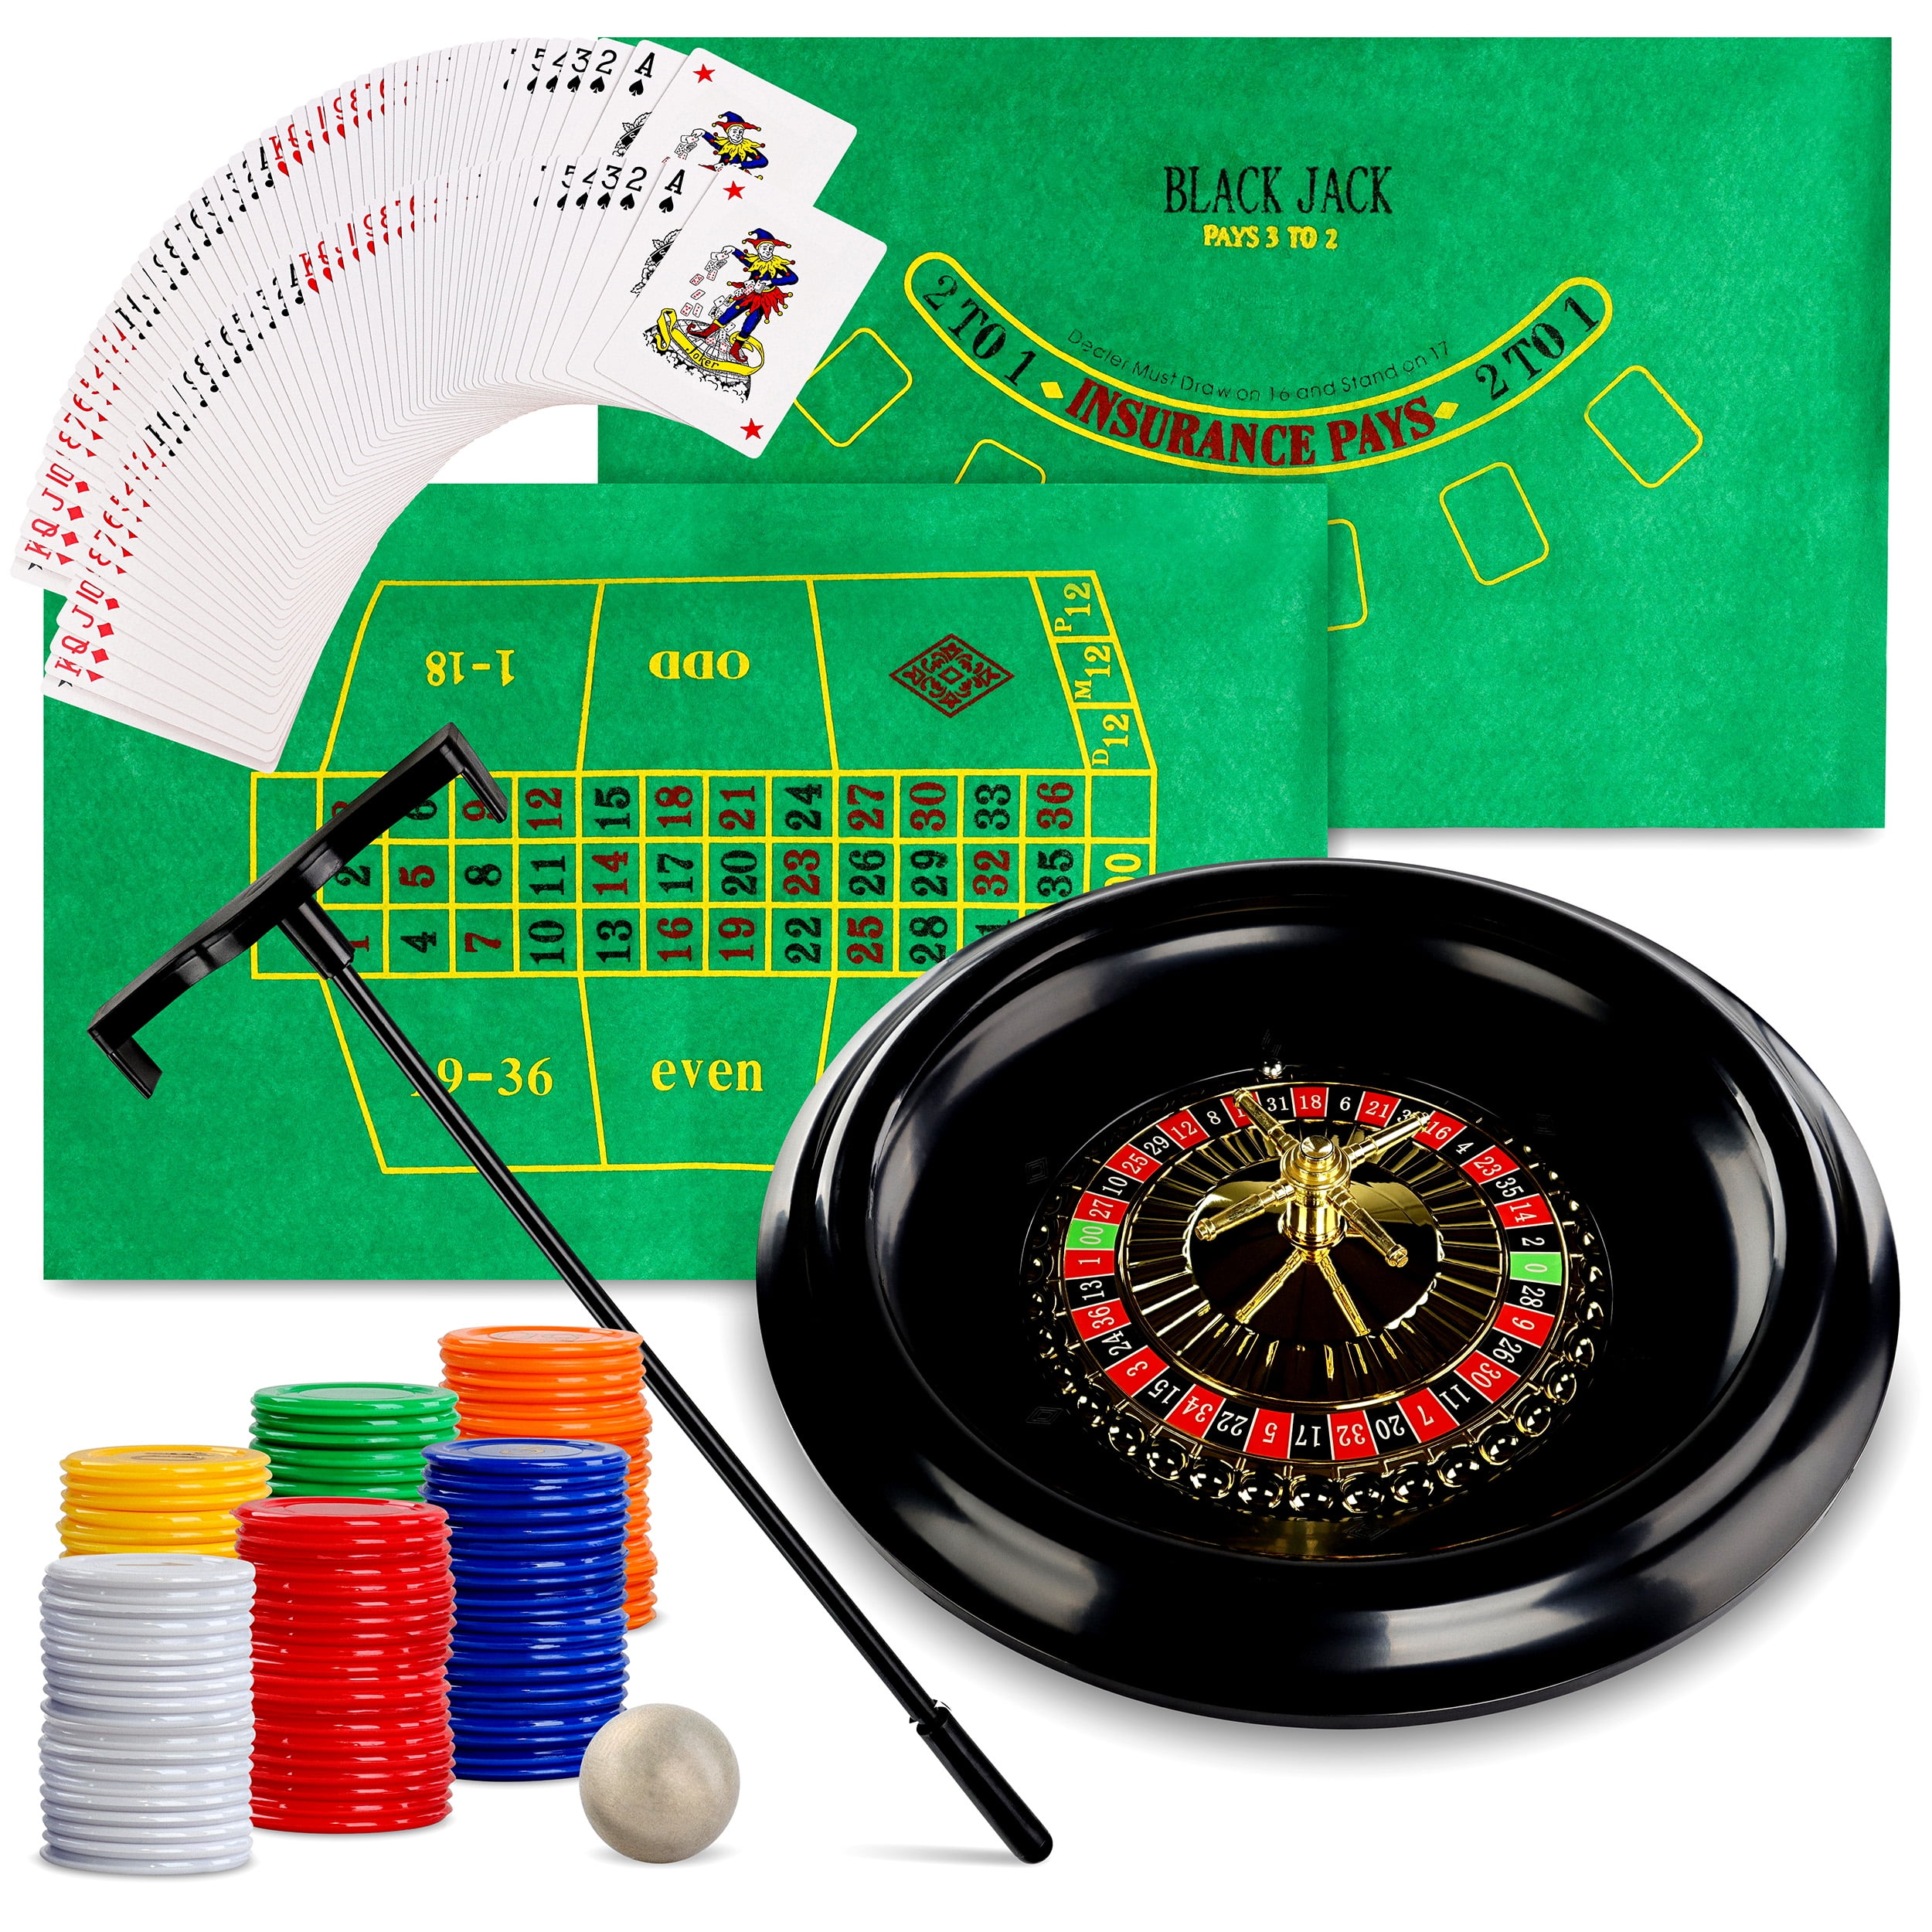 Mini Roulette Game Set,Tabletop Casino Game Night Games for Family Game